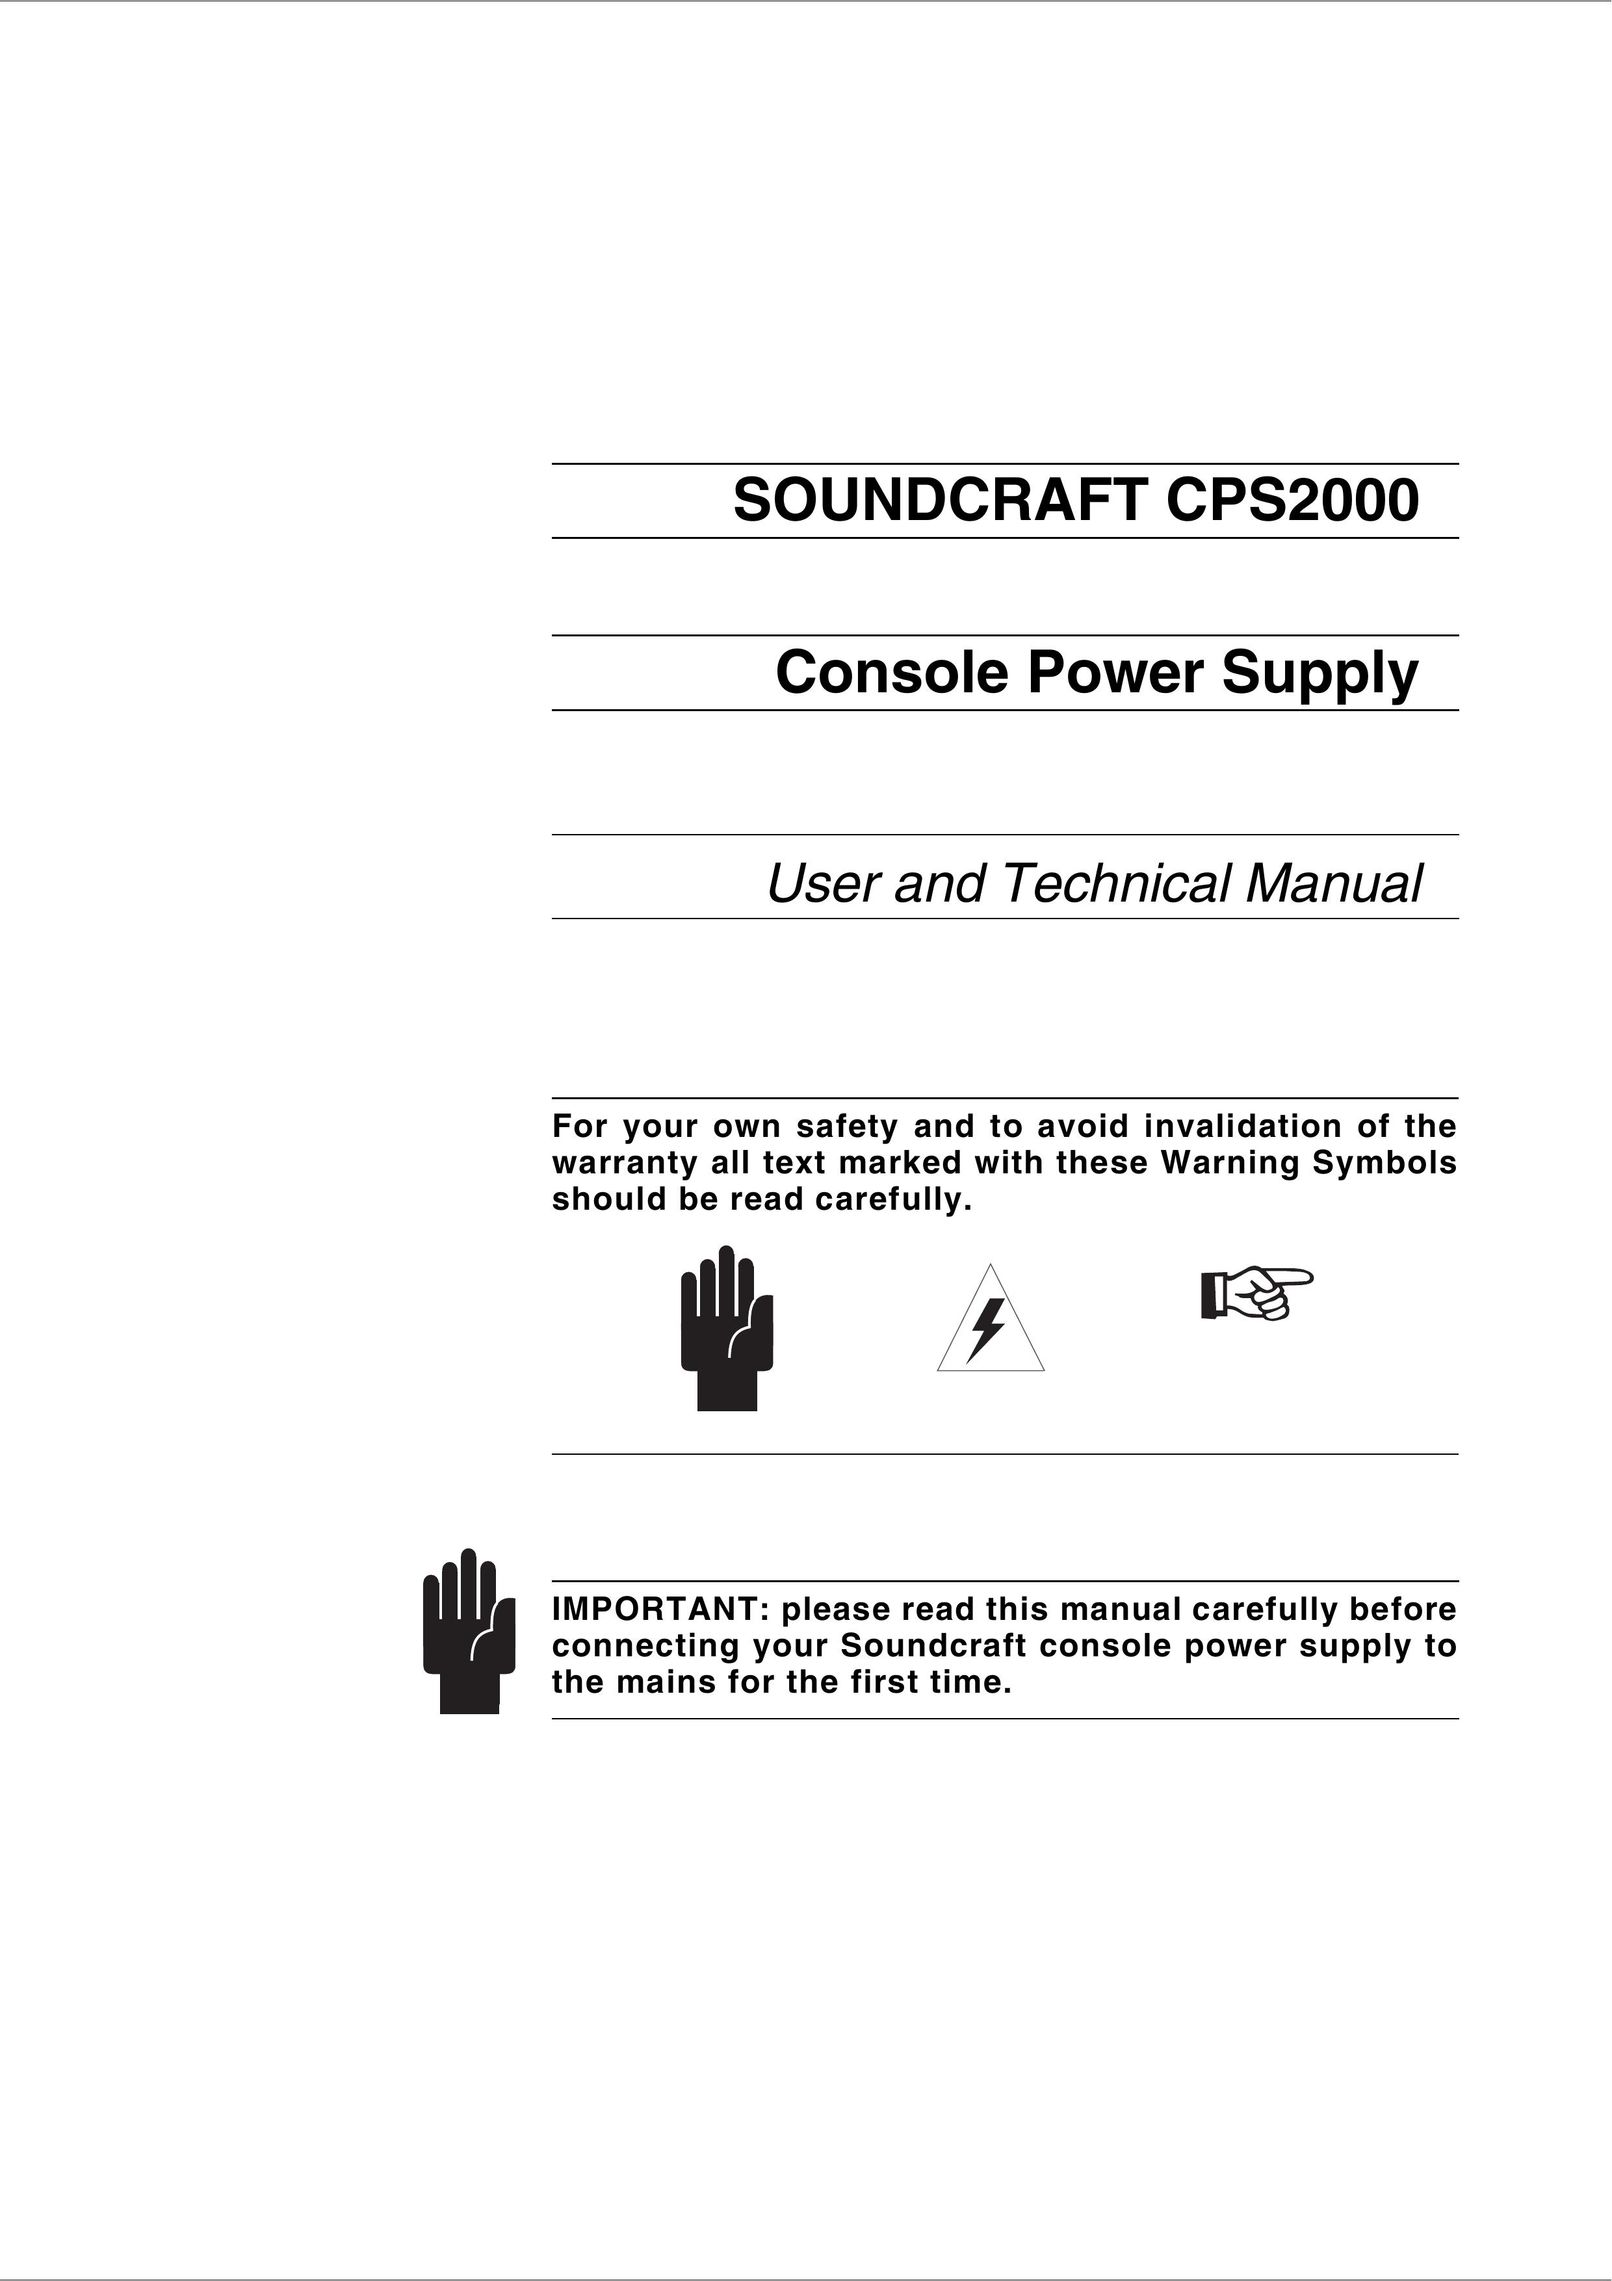 SoundCraft CPS2000 Video Gaming Accessories User Manual